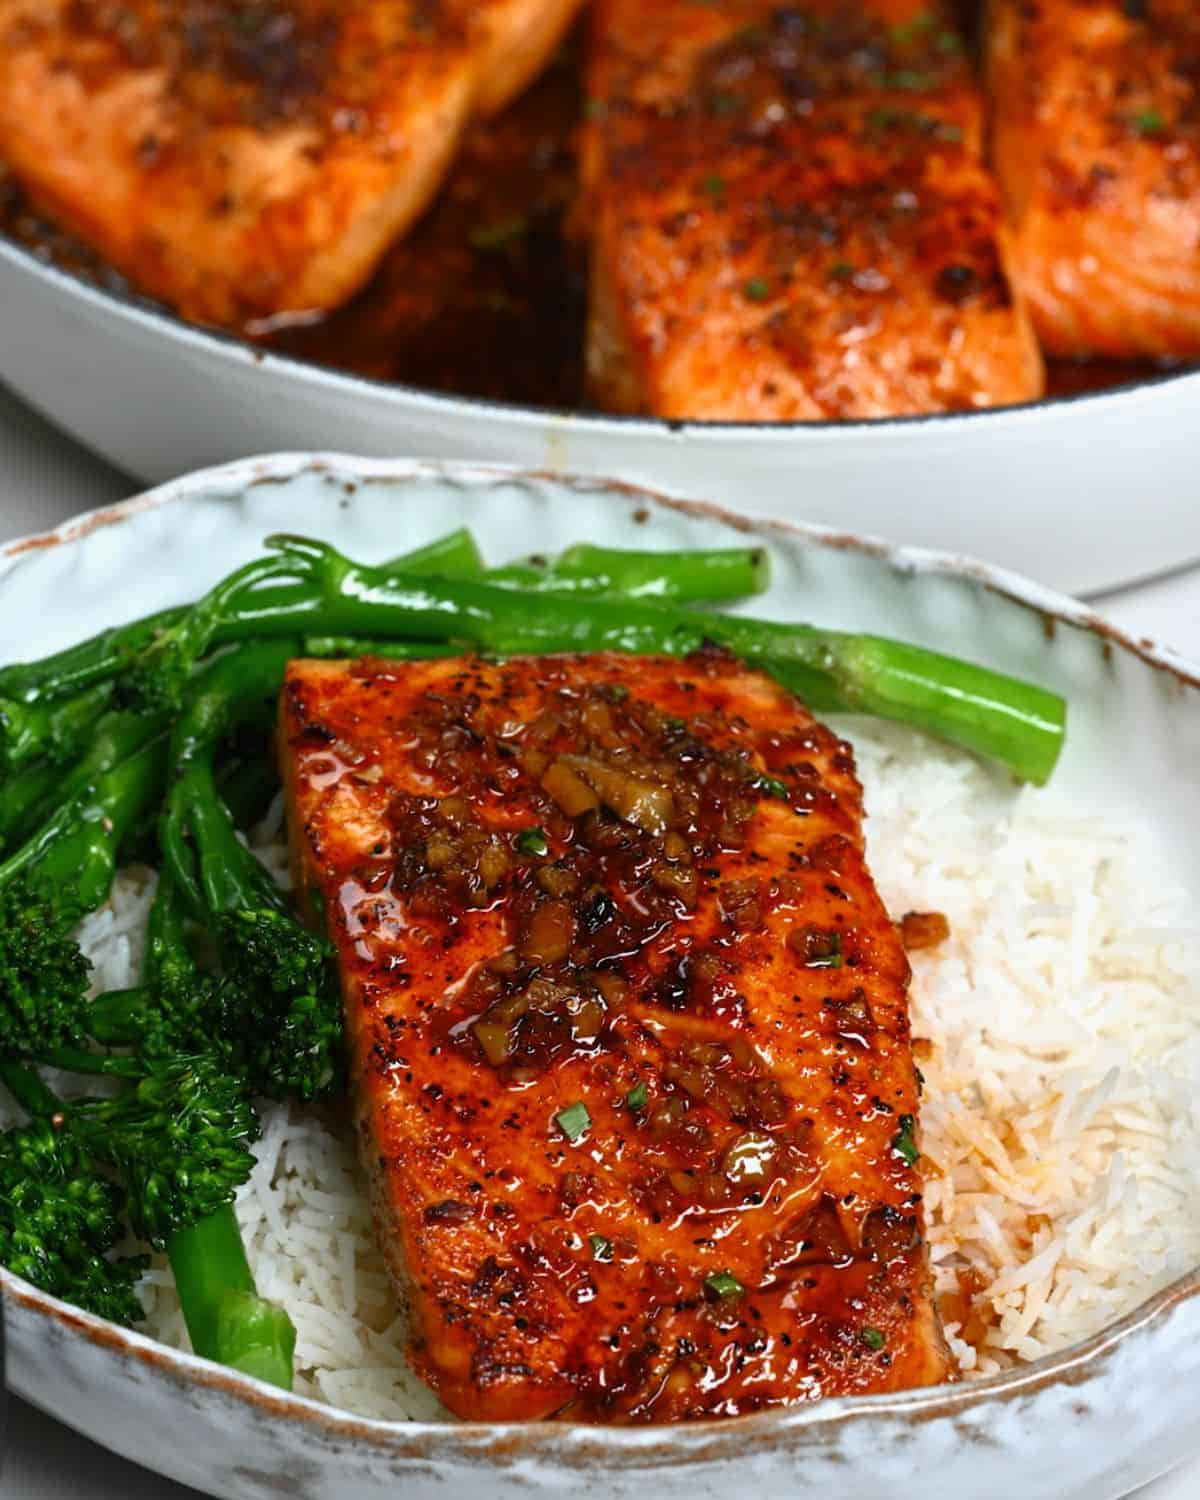 A serving of honey glazed salmon fillet with rice and broccolini